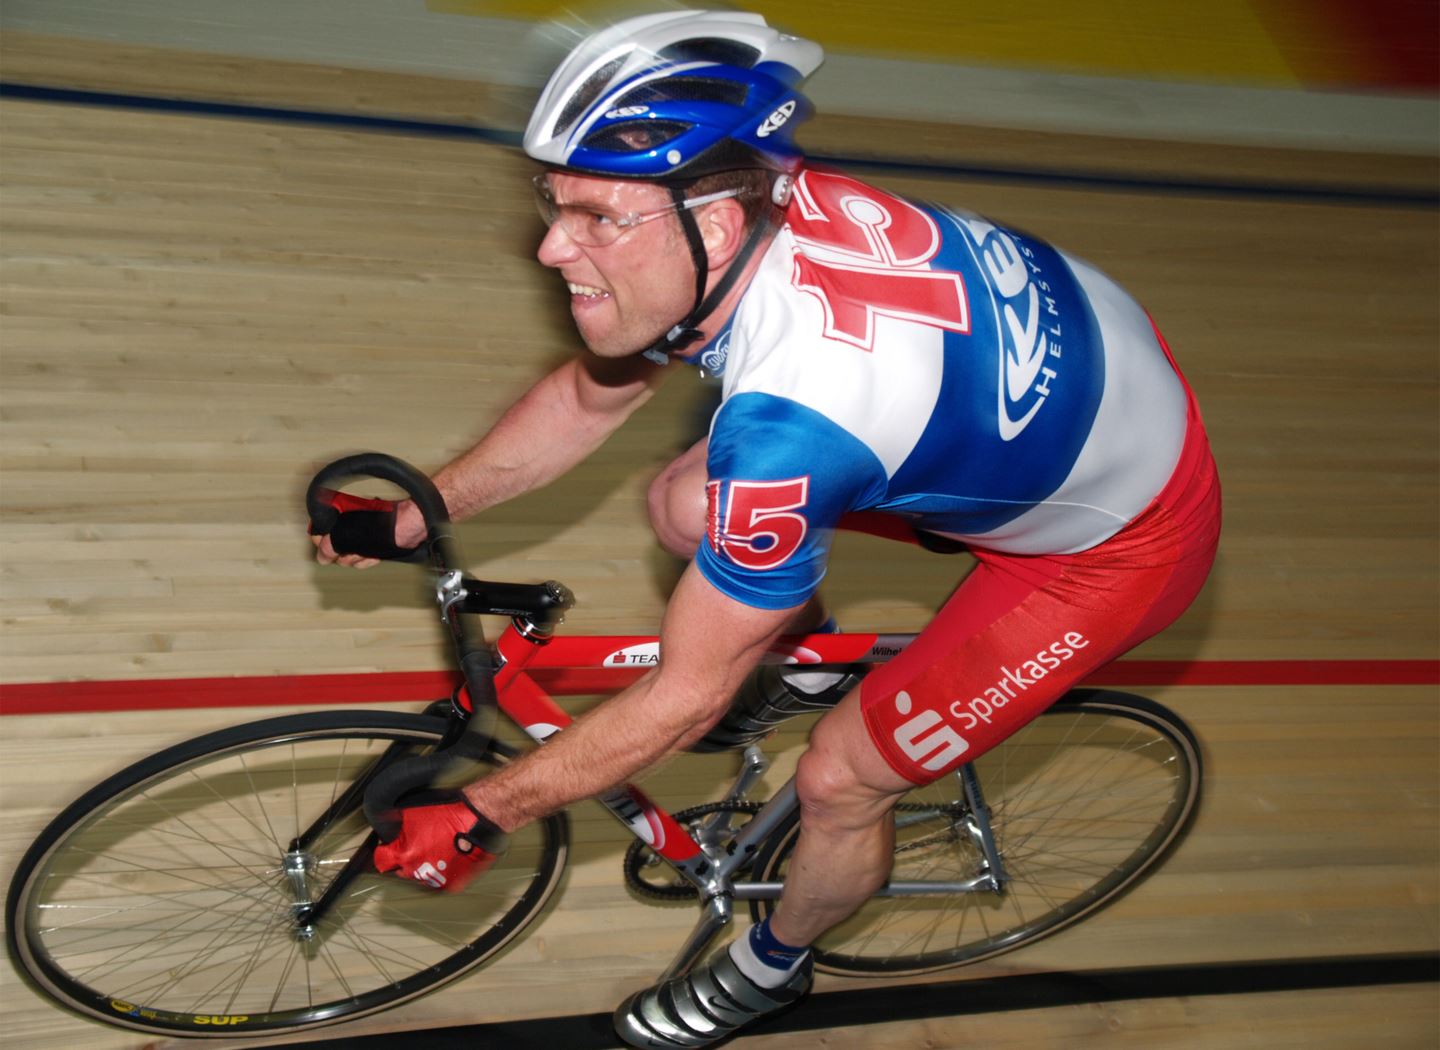 Thorsten on TIME at six day